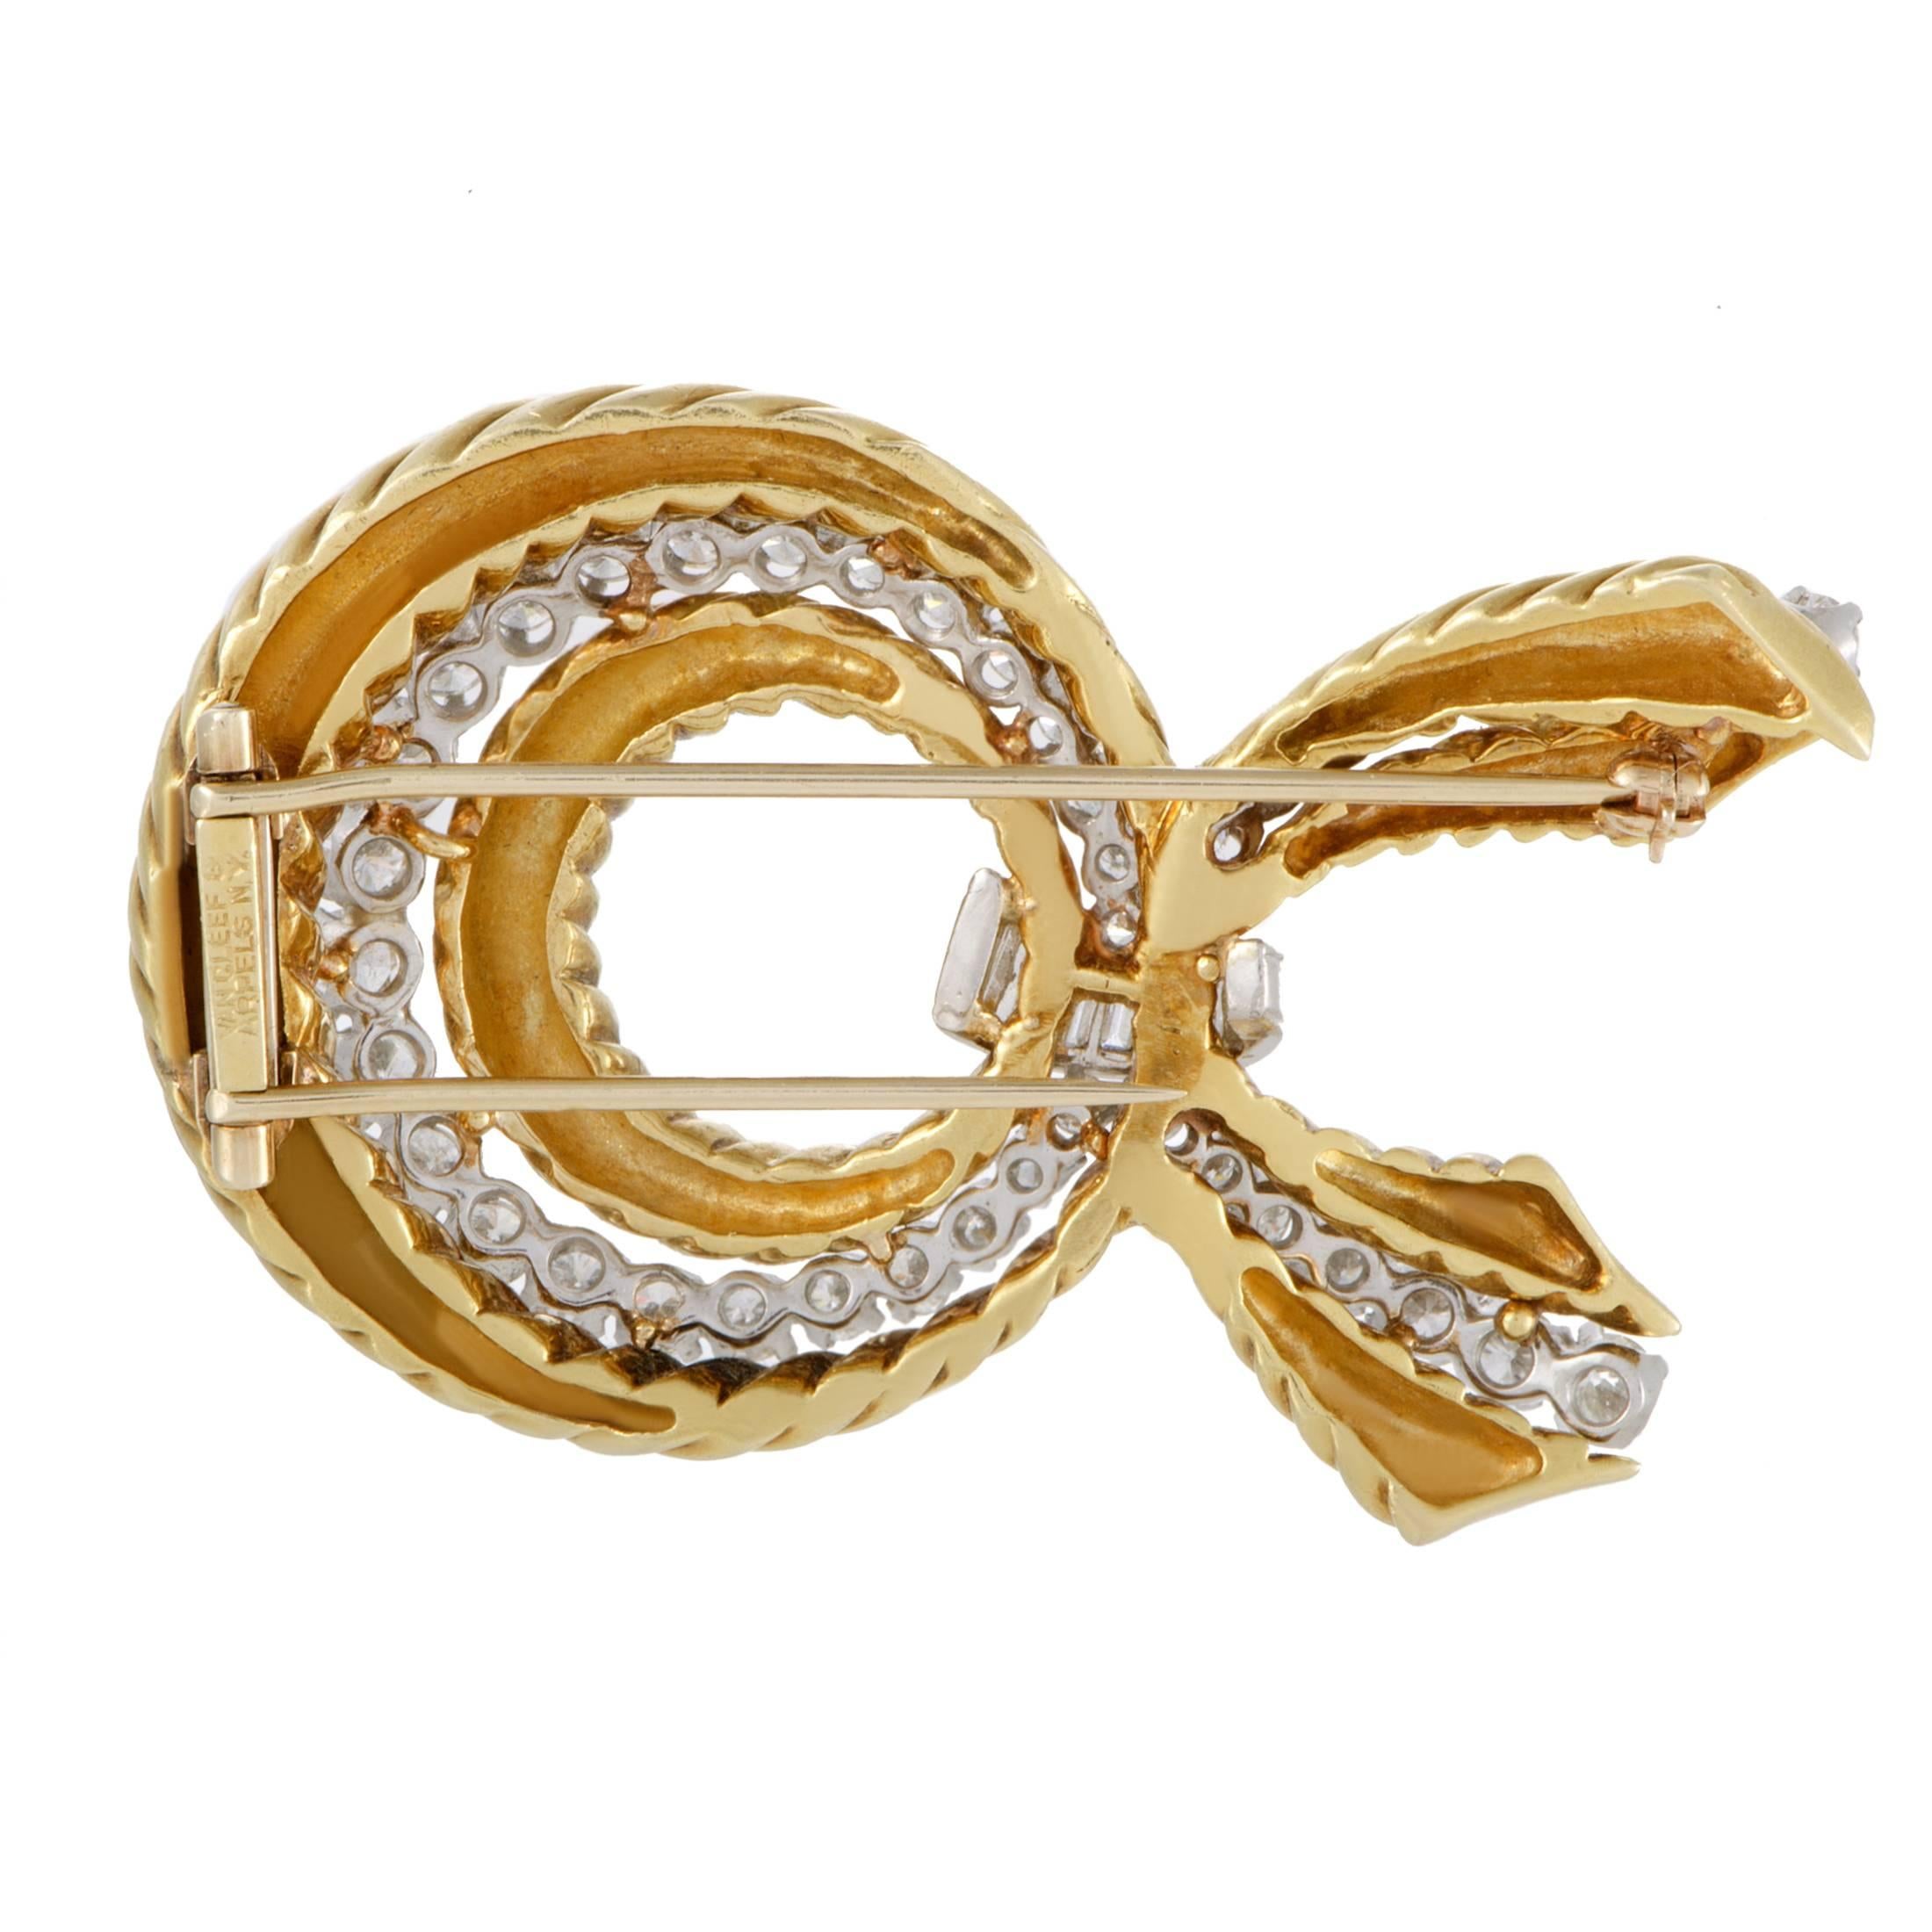 The intricate pattern of gold brilliantly combines with the precious sparkle of diamonds amounting to 3.50 carats to produce a stunning allure in this fabulous brooch from Van Cleef & Arpels which is made of a prestigious blend of 18K yellow and